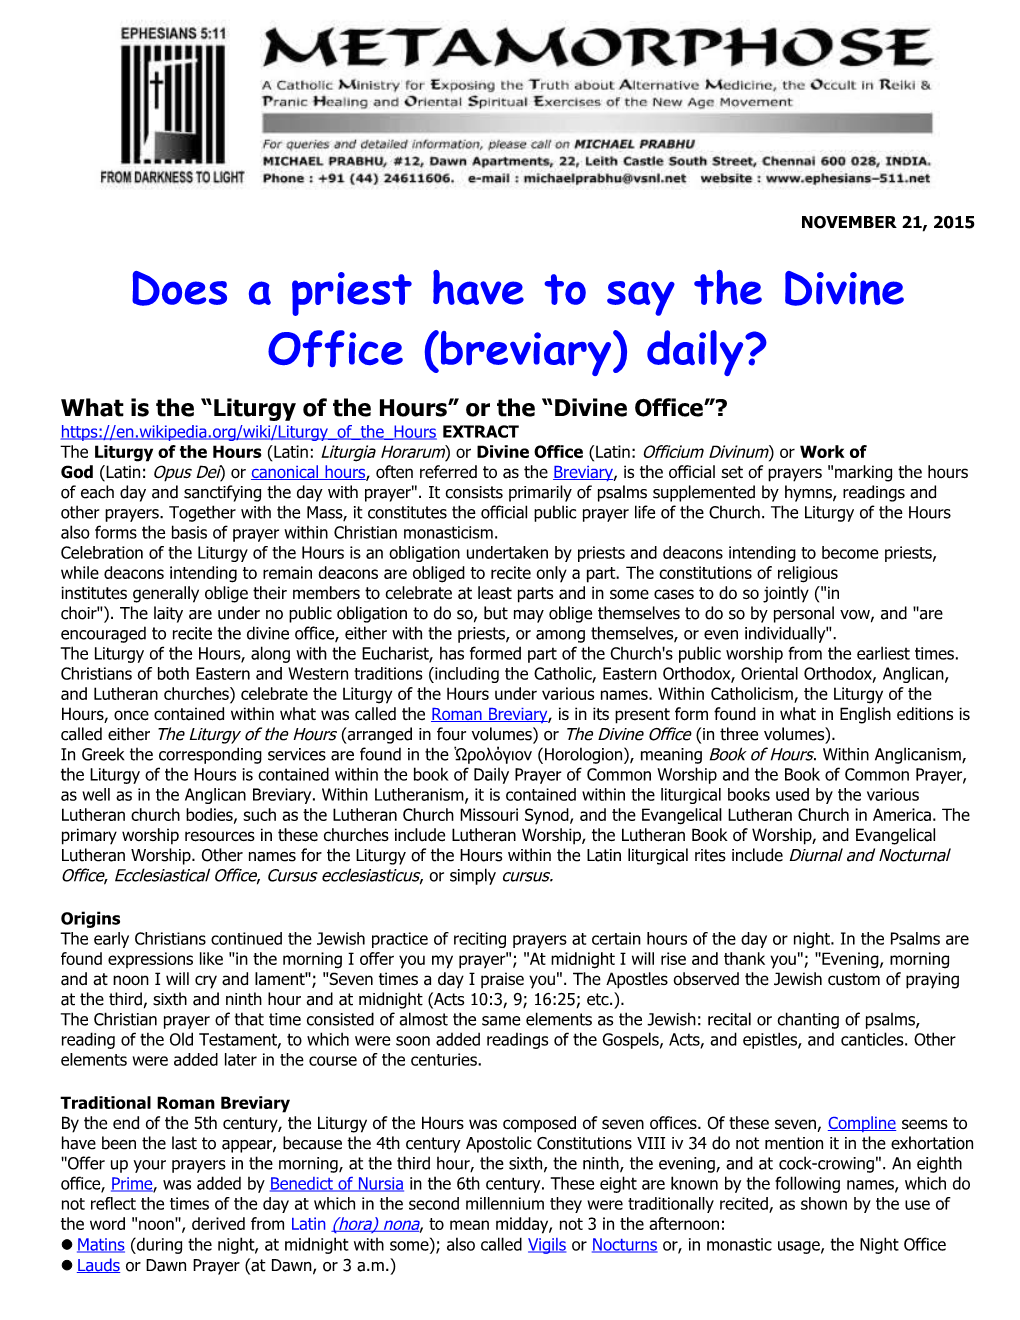 Does a Priest Have to Say the Divine Office (Breviary) Daily?